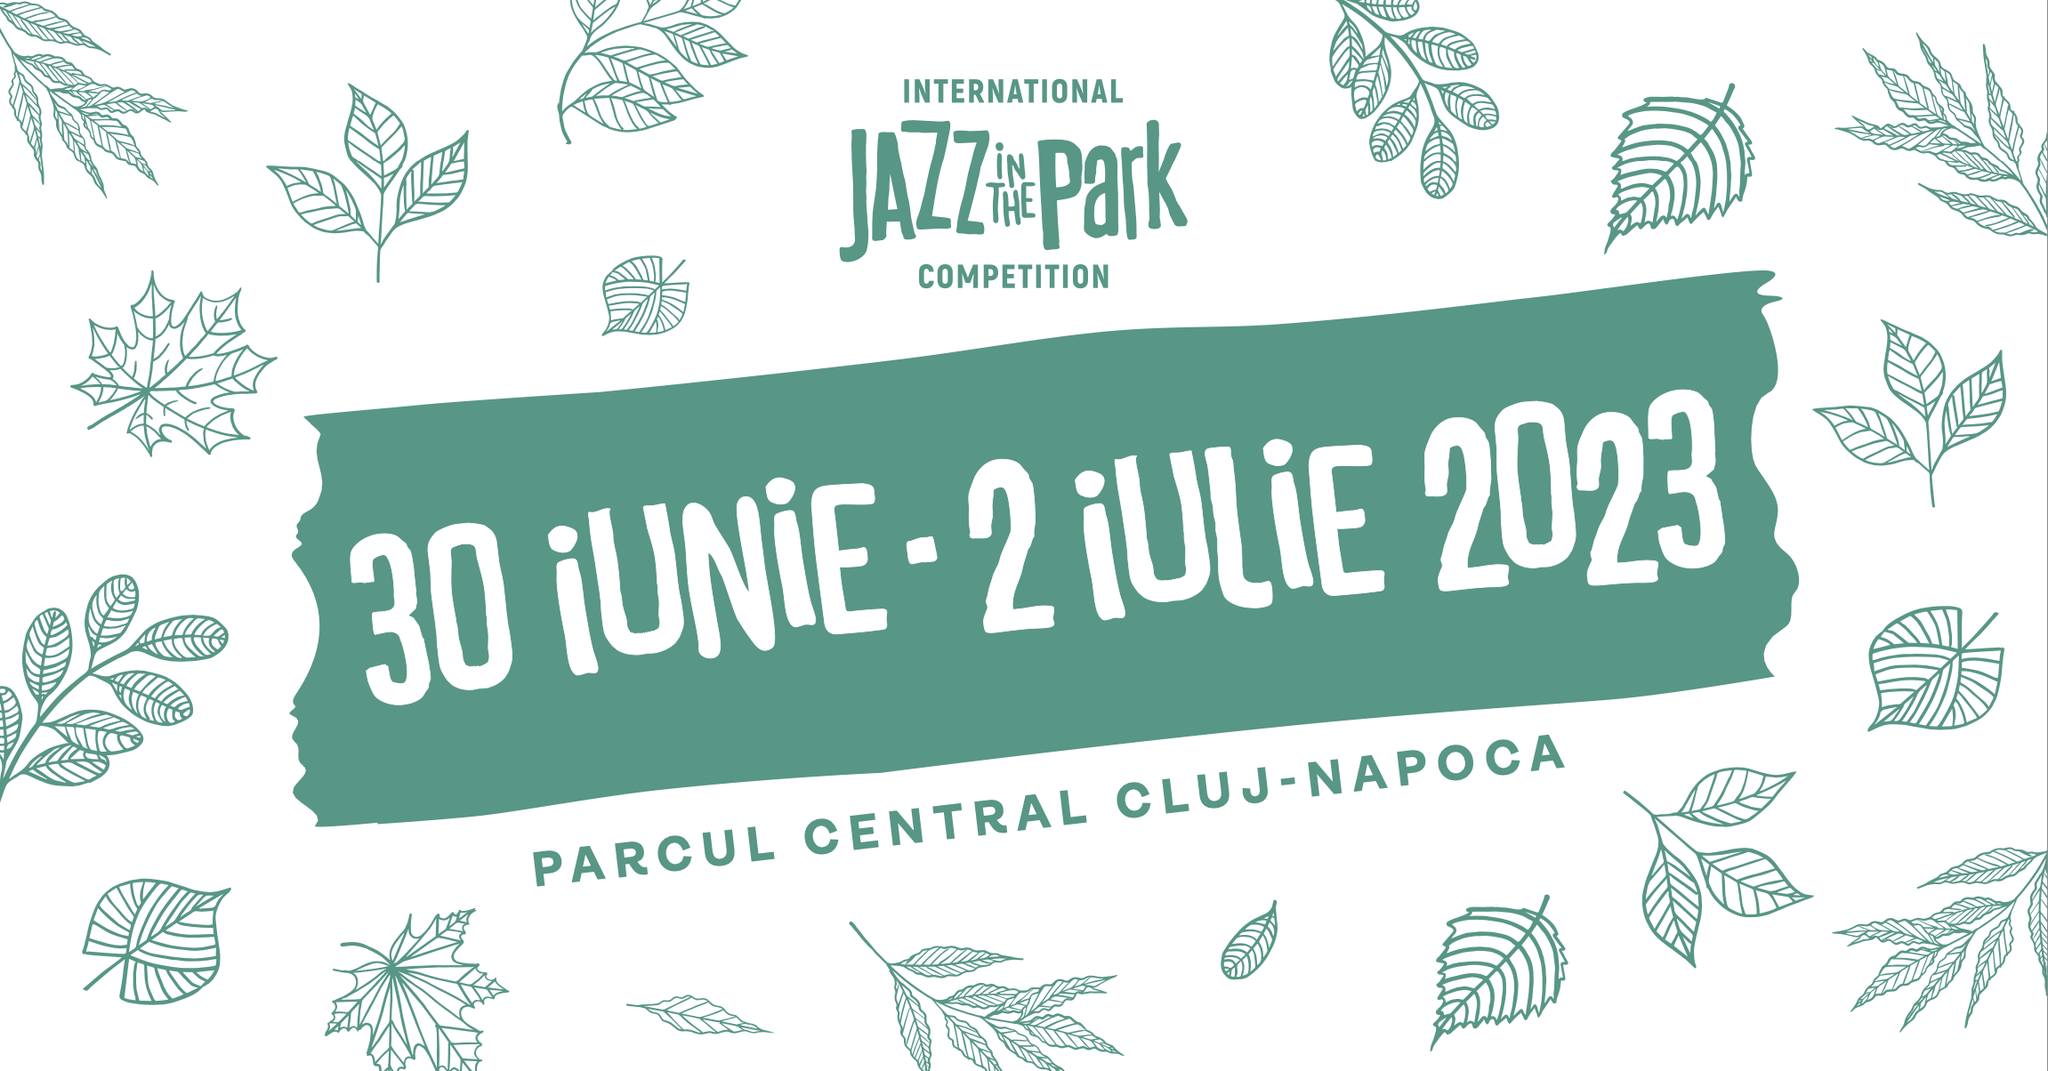 International Jazz in the Park Competition